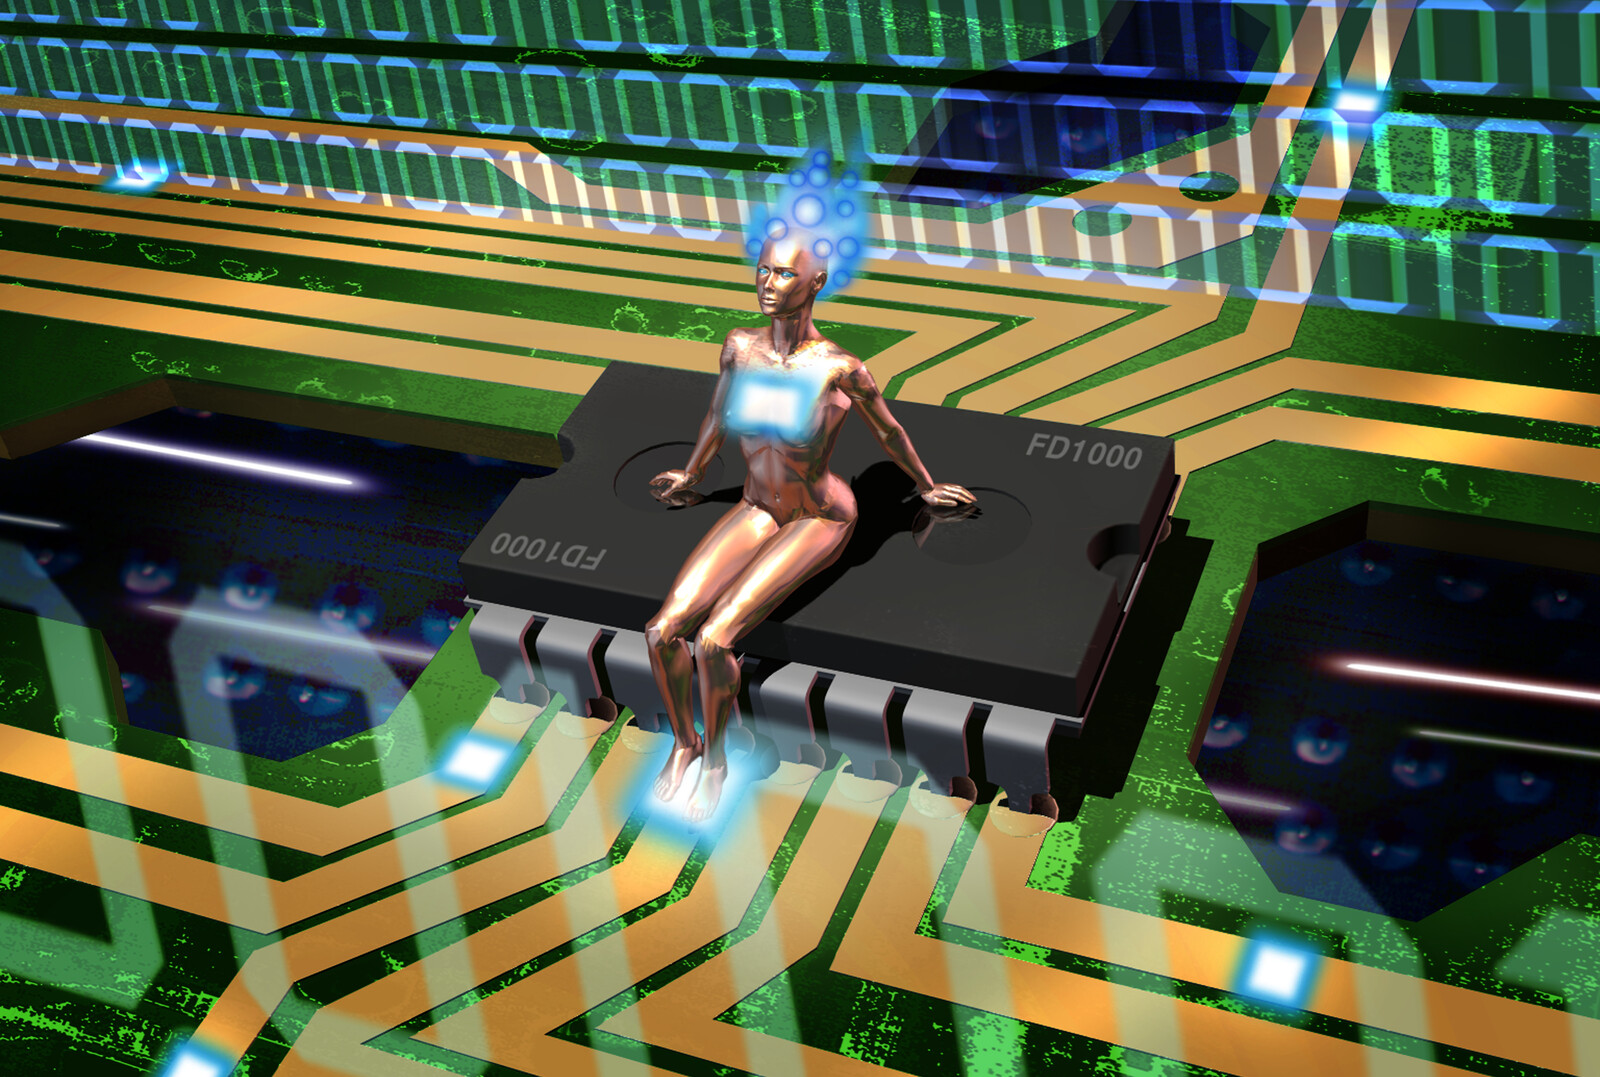 One of my early Digital artworks. High-tech Bench was created in July 2000. It's like the birth of the AI resting and sitting on a computer chip finding its moment to shine.